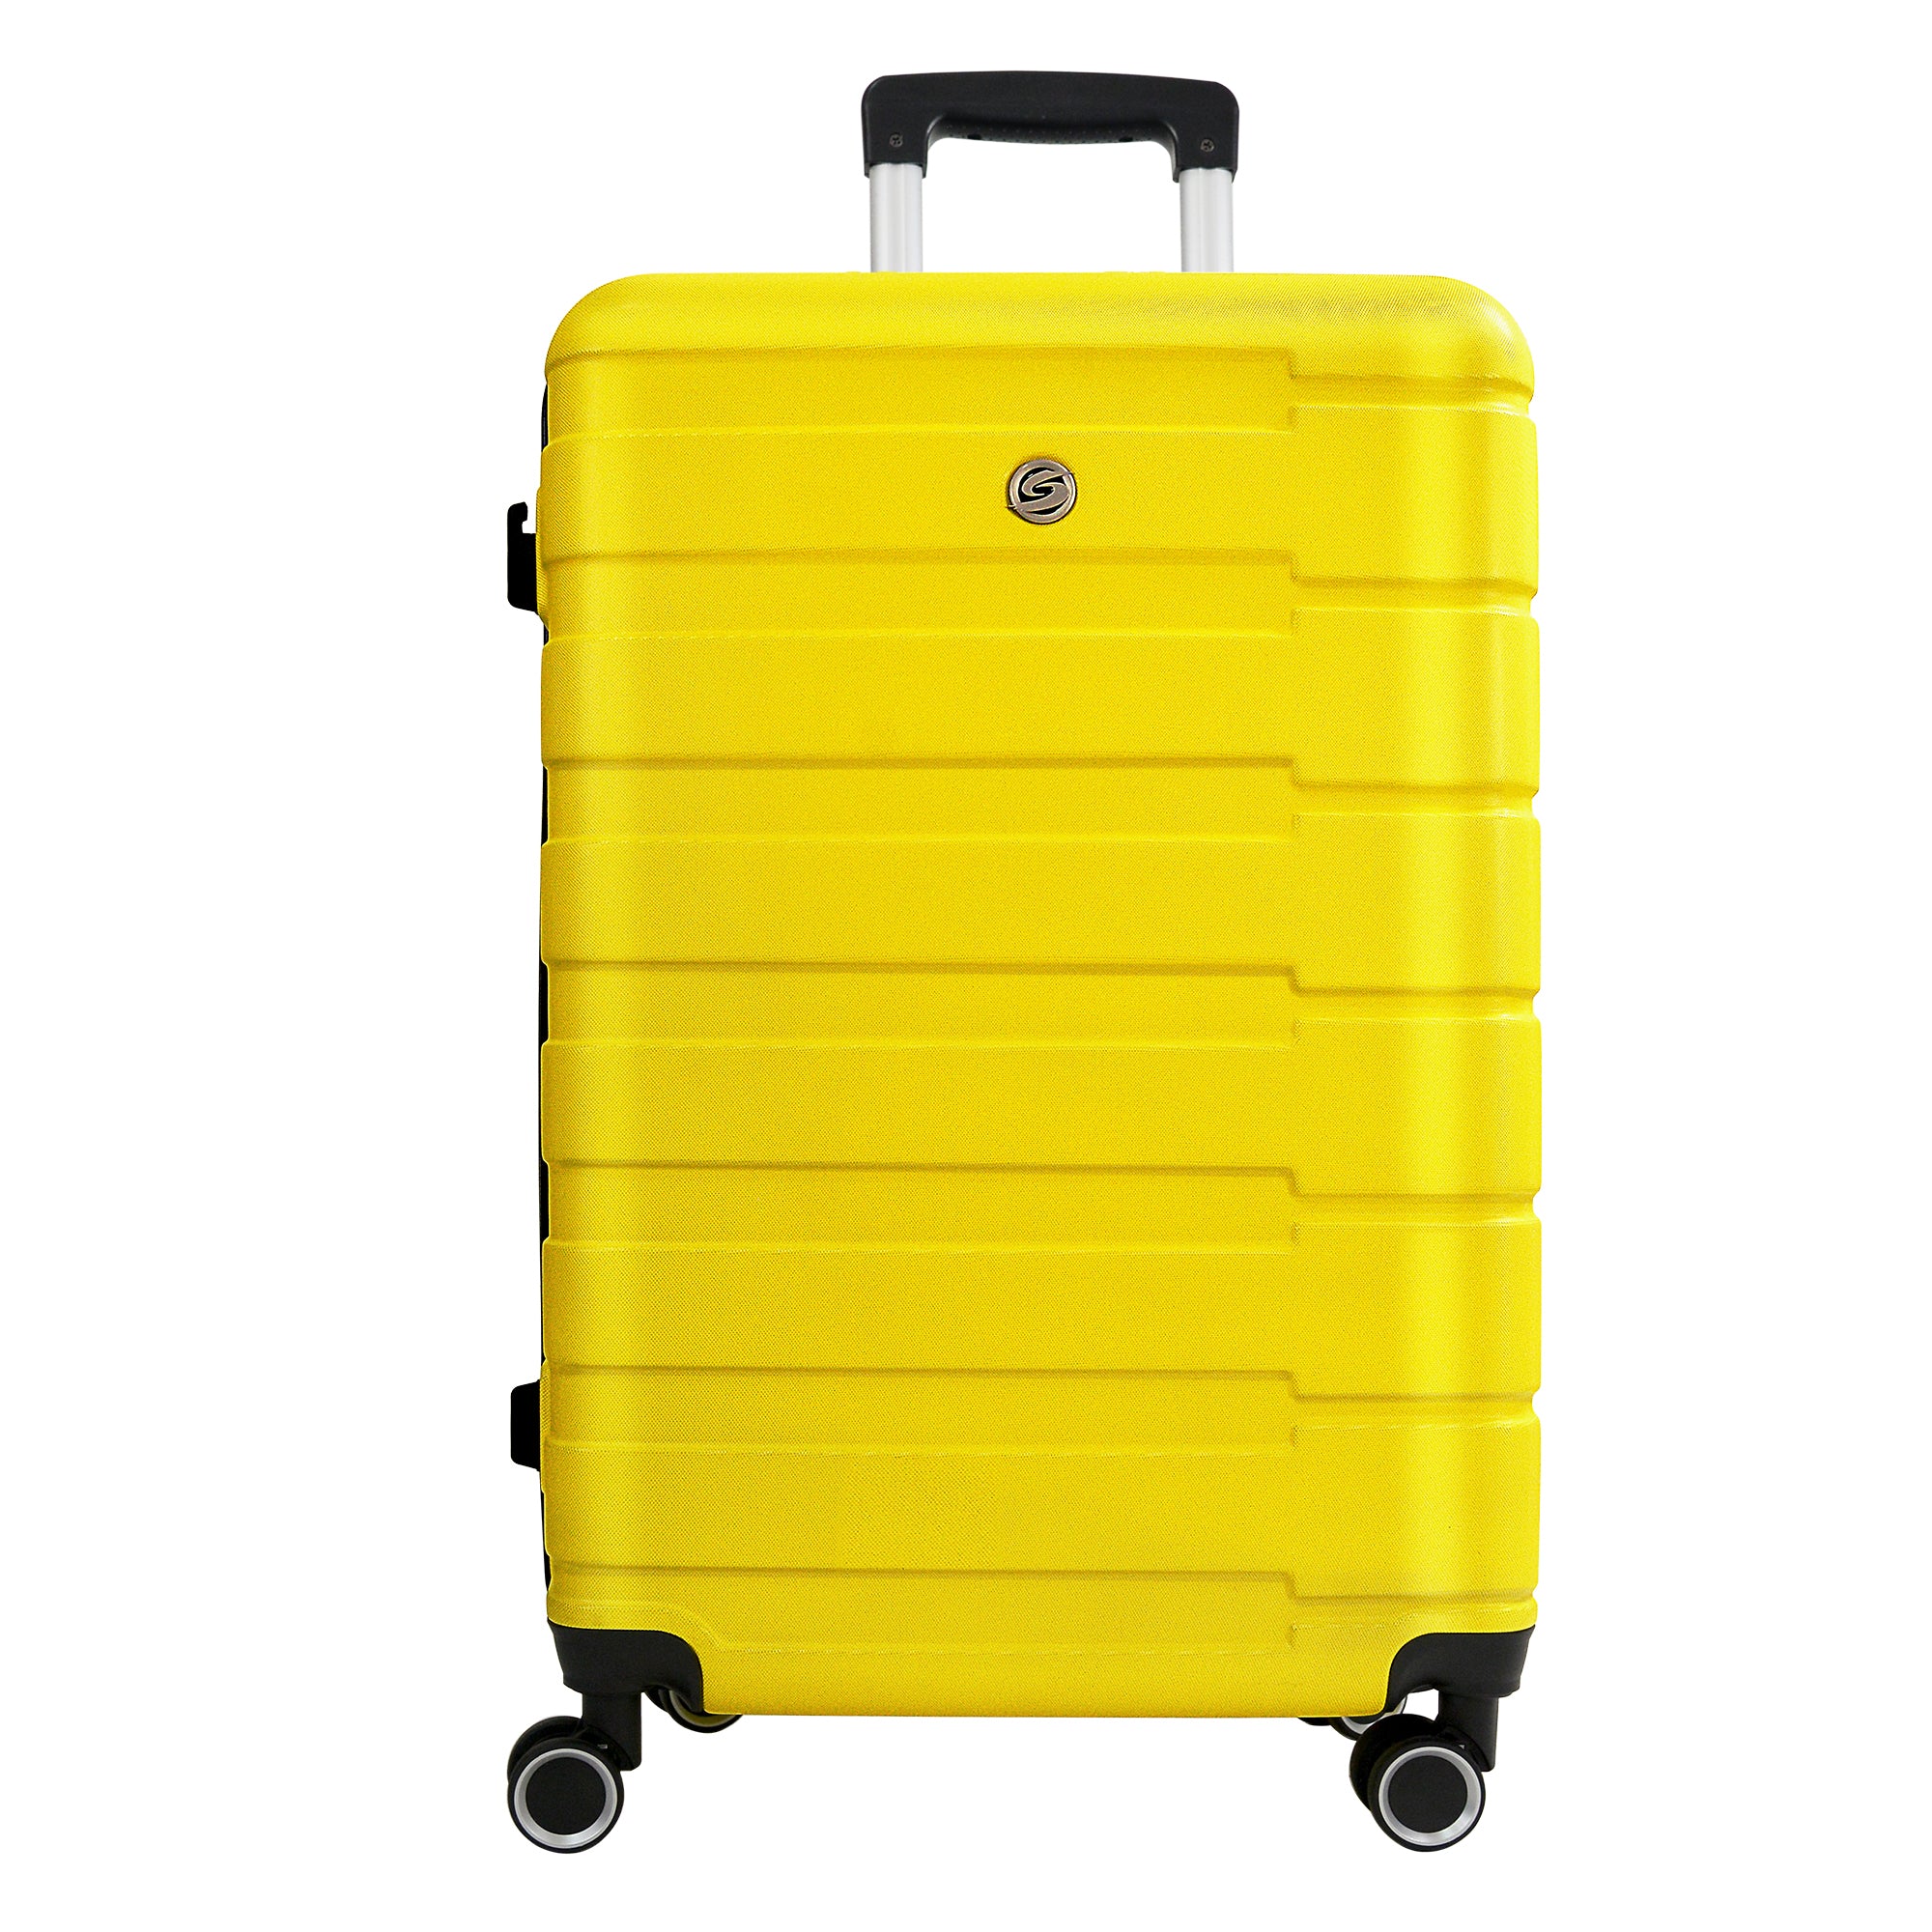 Luggage Sets 2 Piece, 20 inch 24 inch Carry on Luggage yellow-abs